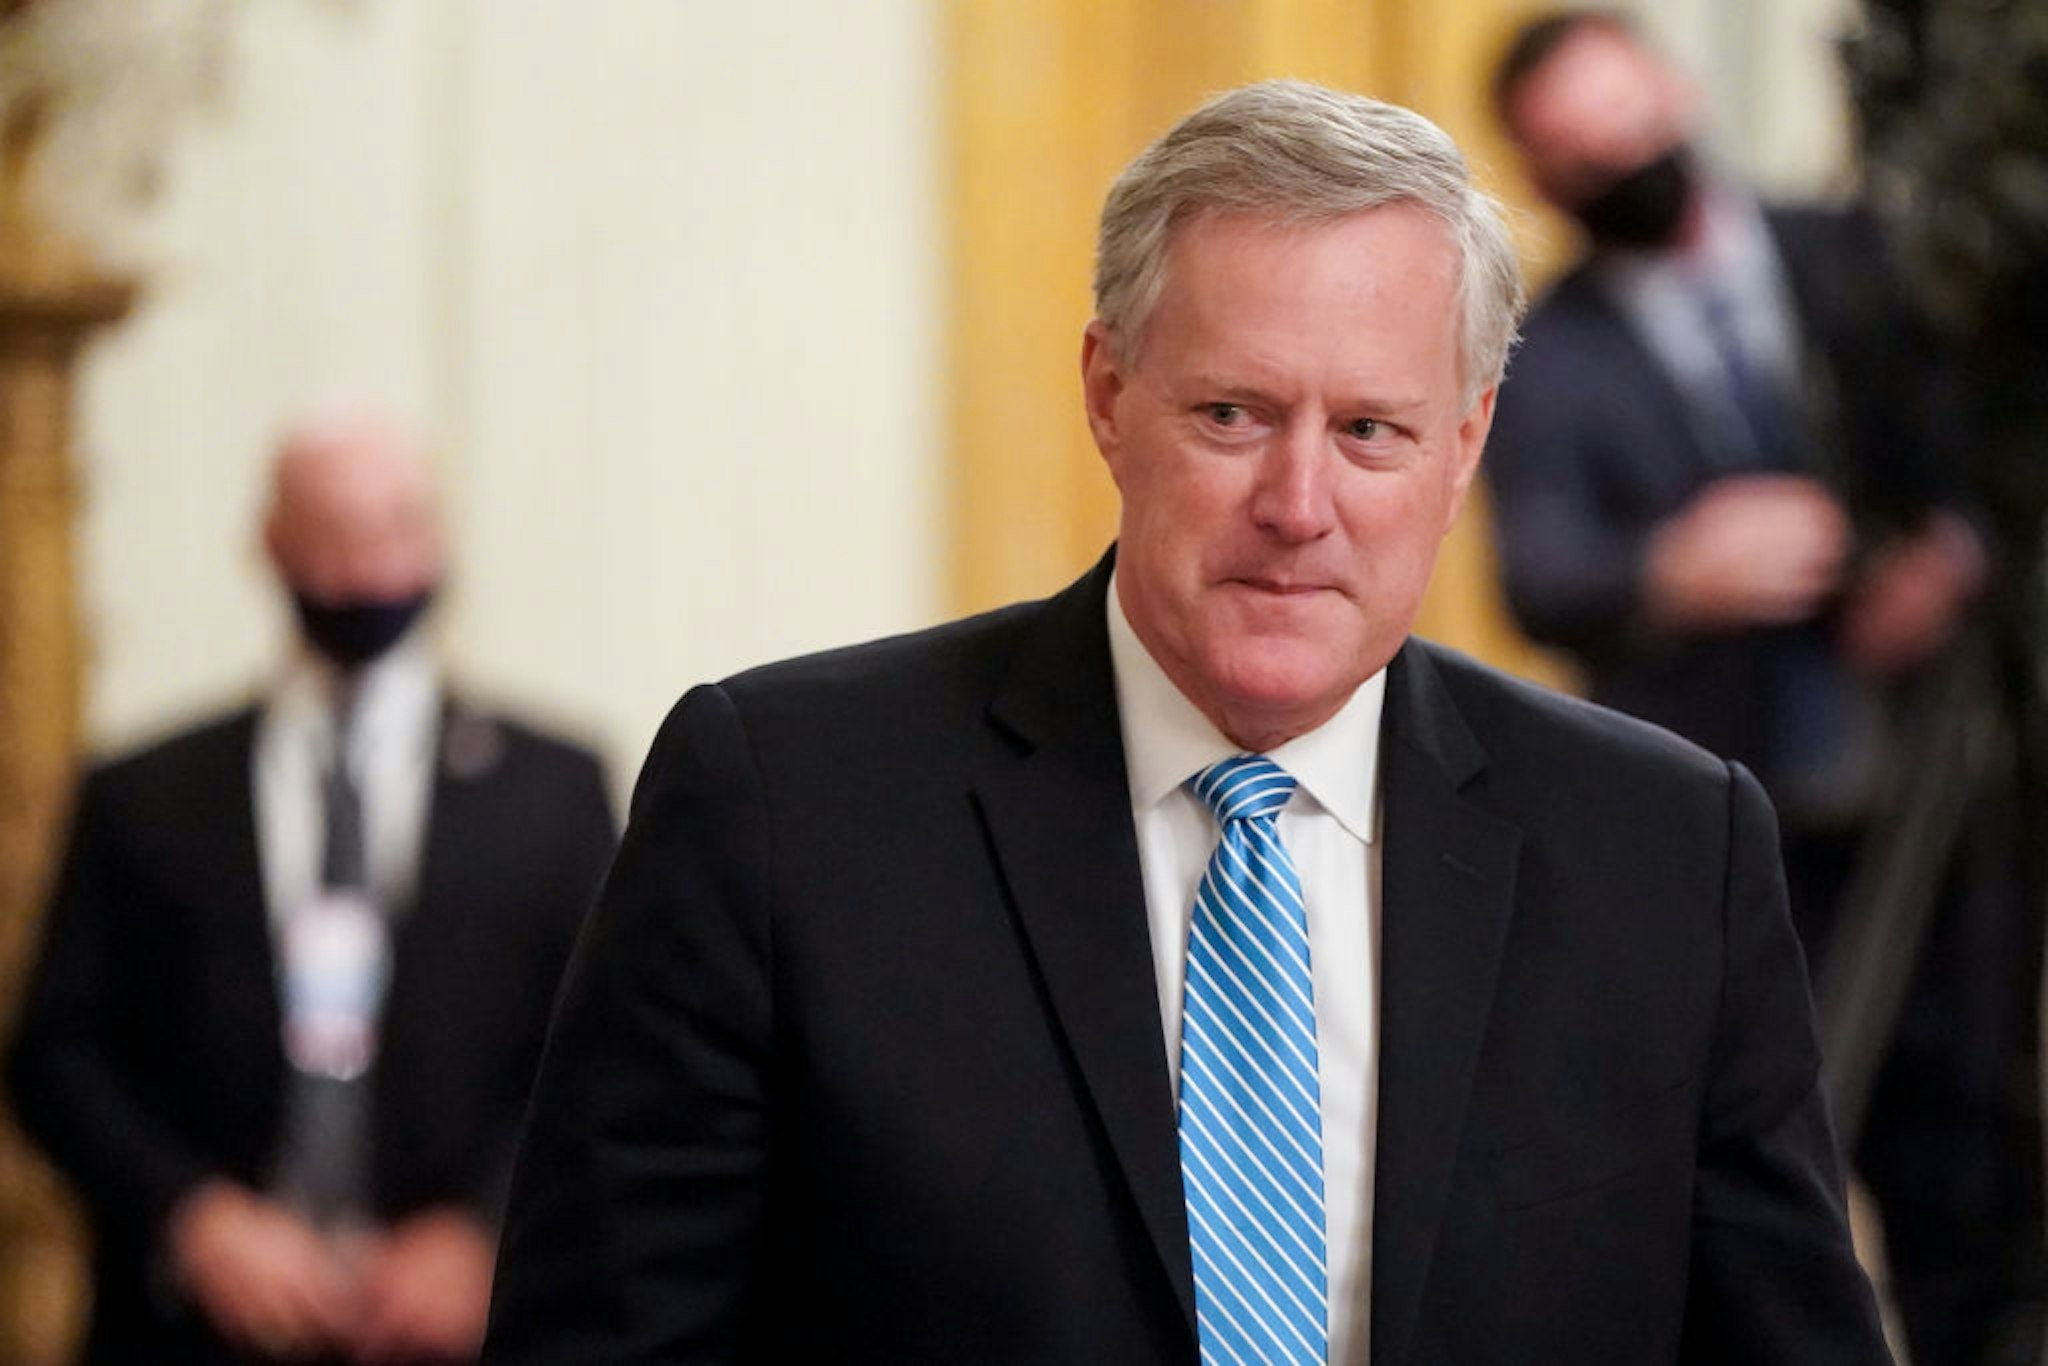 U.S. White House Chief of Staff Mark Meadows departs after President Donald Trump delivered remarks in honor of Bay of Pigs Veterans in the East Room of the White House on September 23, 2020 in Washington, DC.